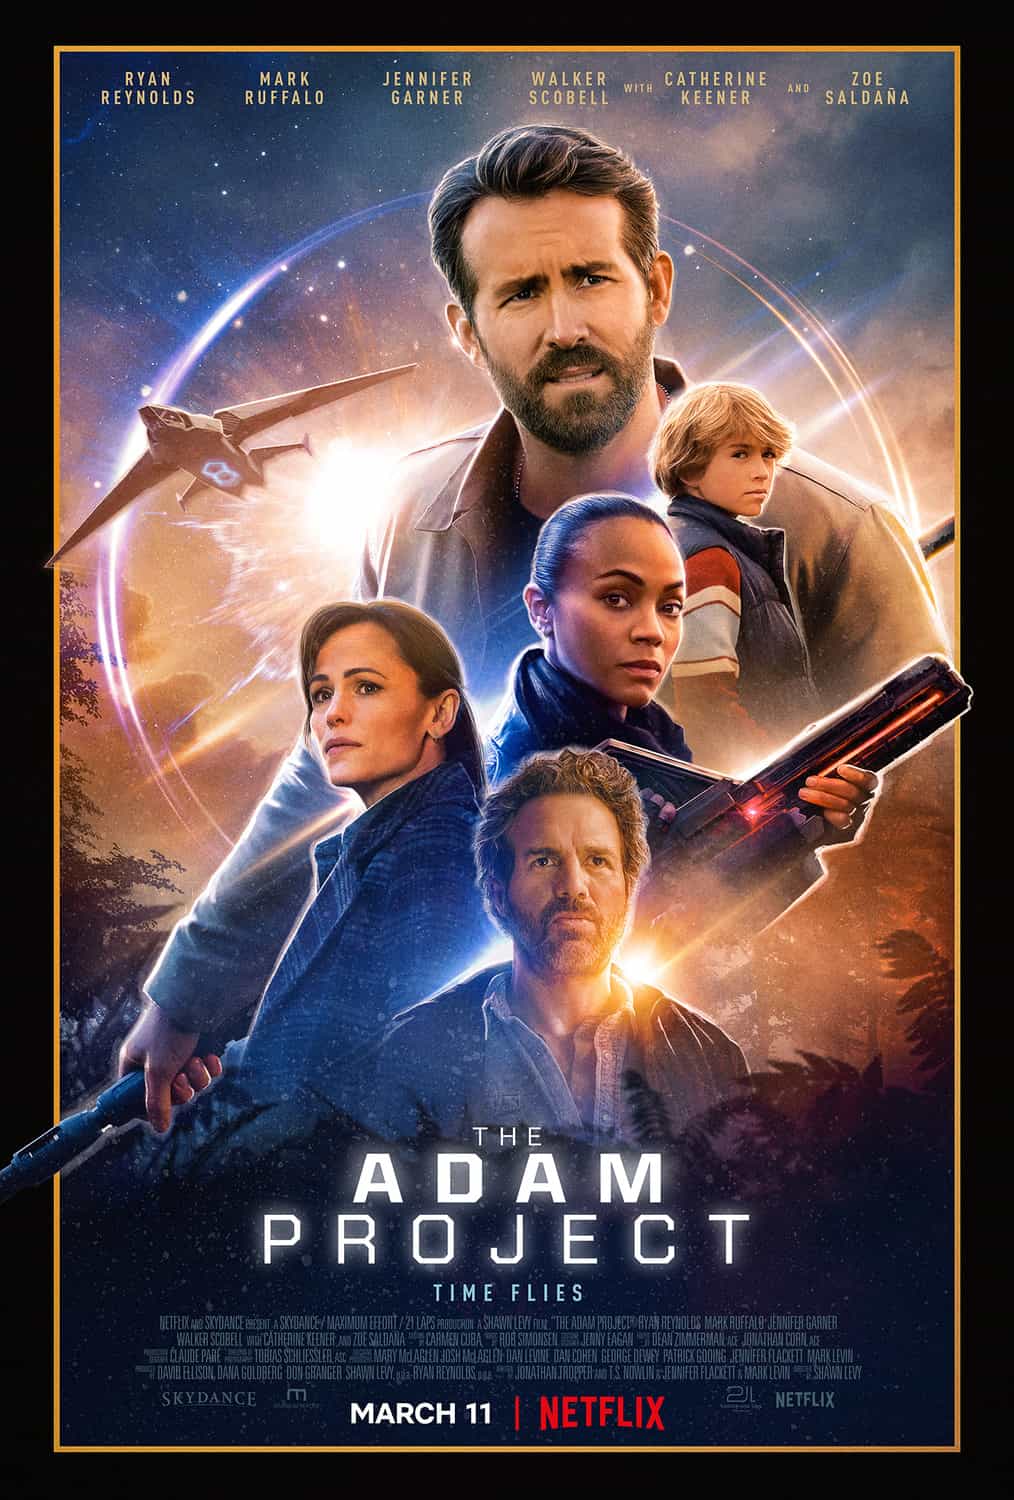 New poster released for The Adam Project starring Ryan Reynolds - movie UK release date 11th March 2022 #theadamproject